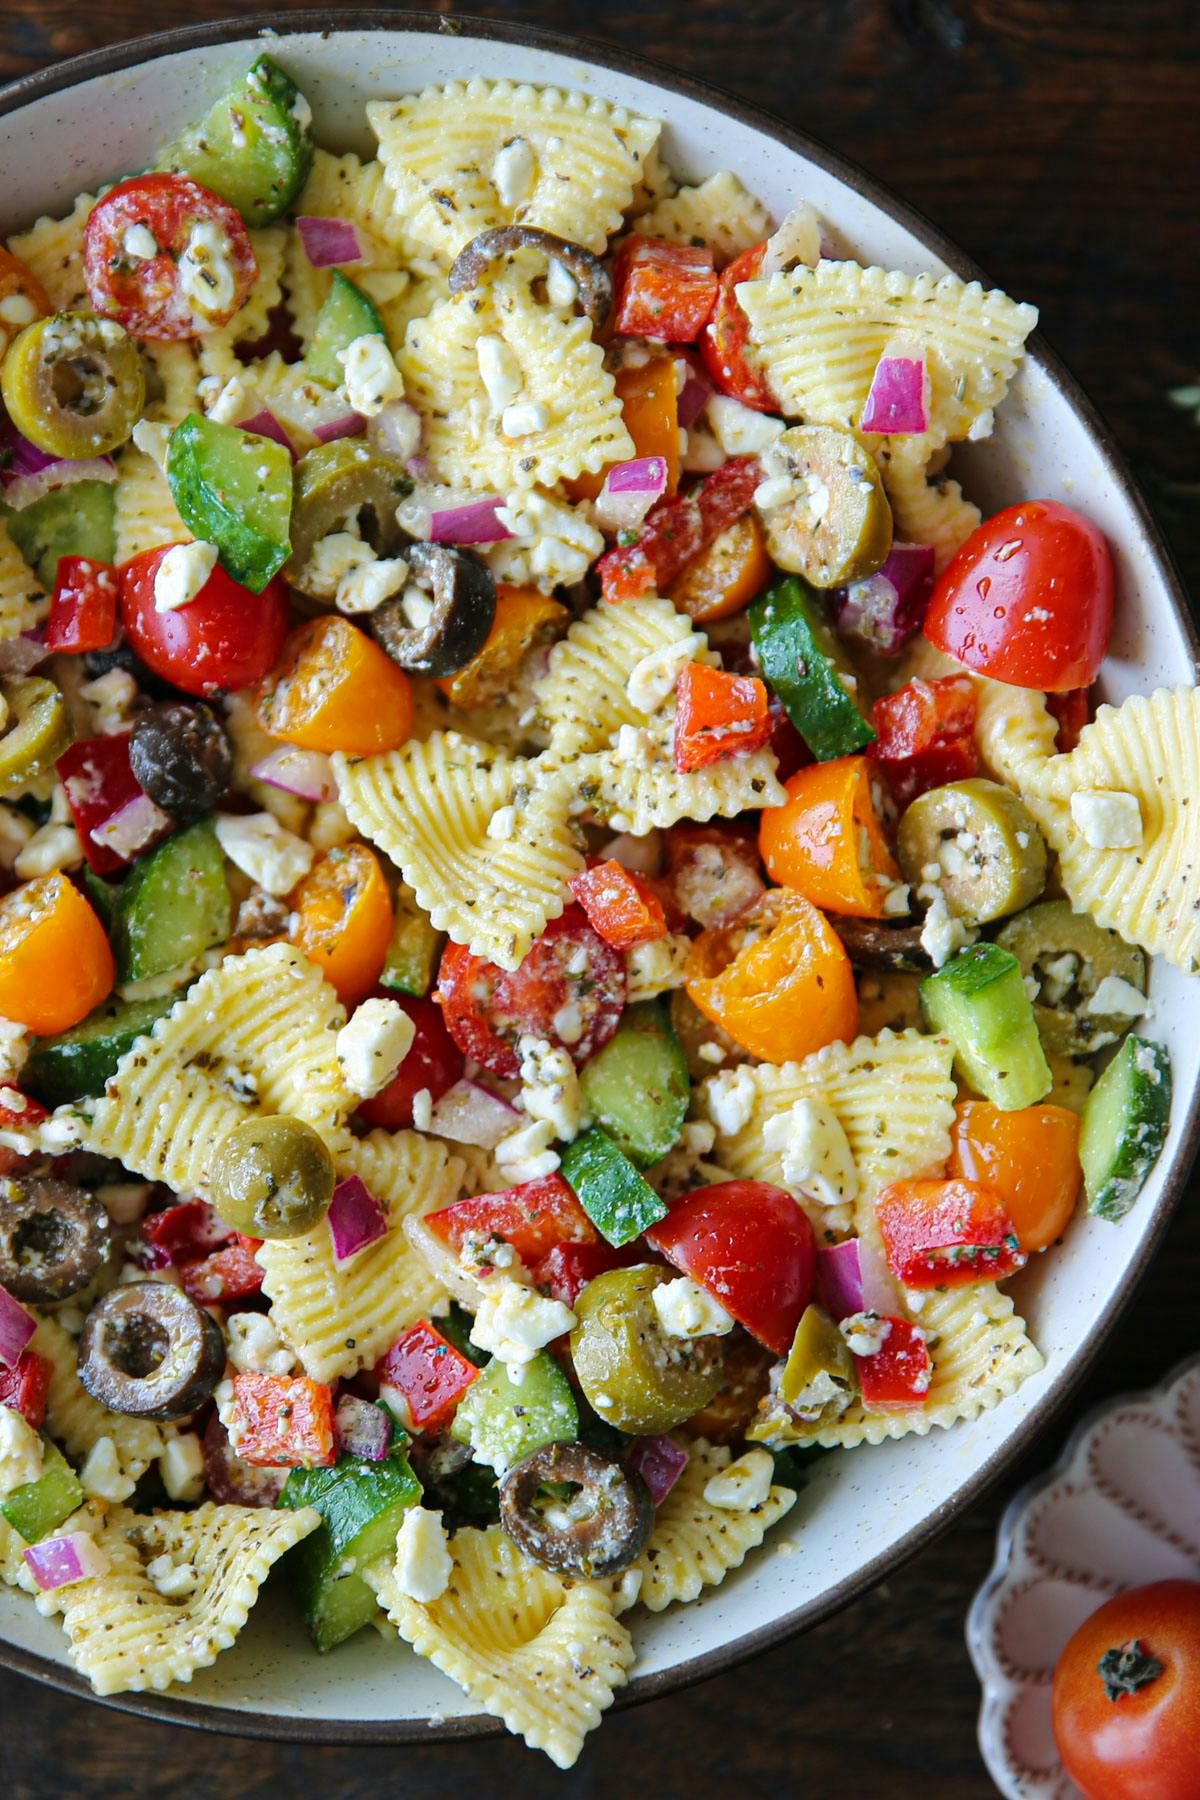 Greek Pasta salad with Tomatoes, cucumber, bell pepper, olives, red onions, and feta cheese.